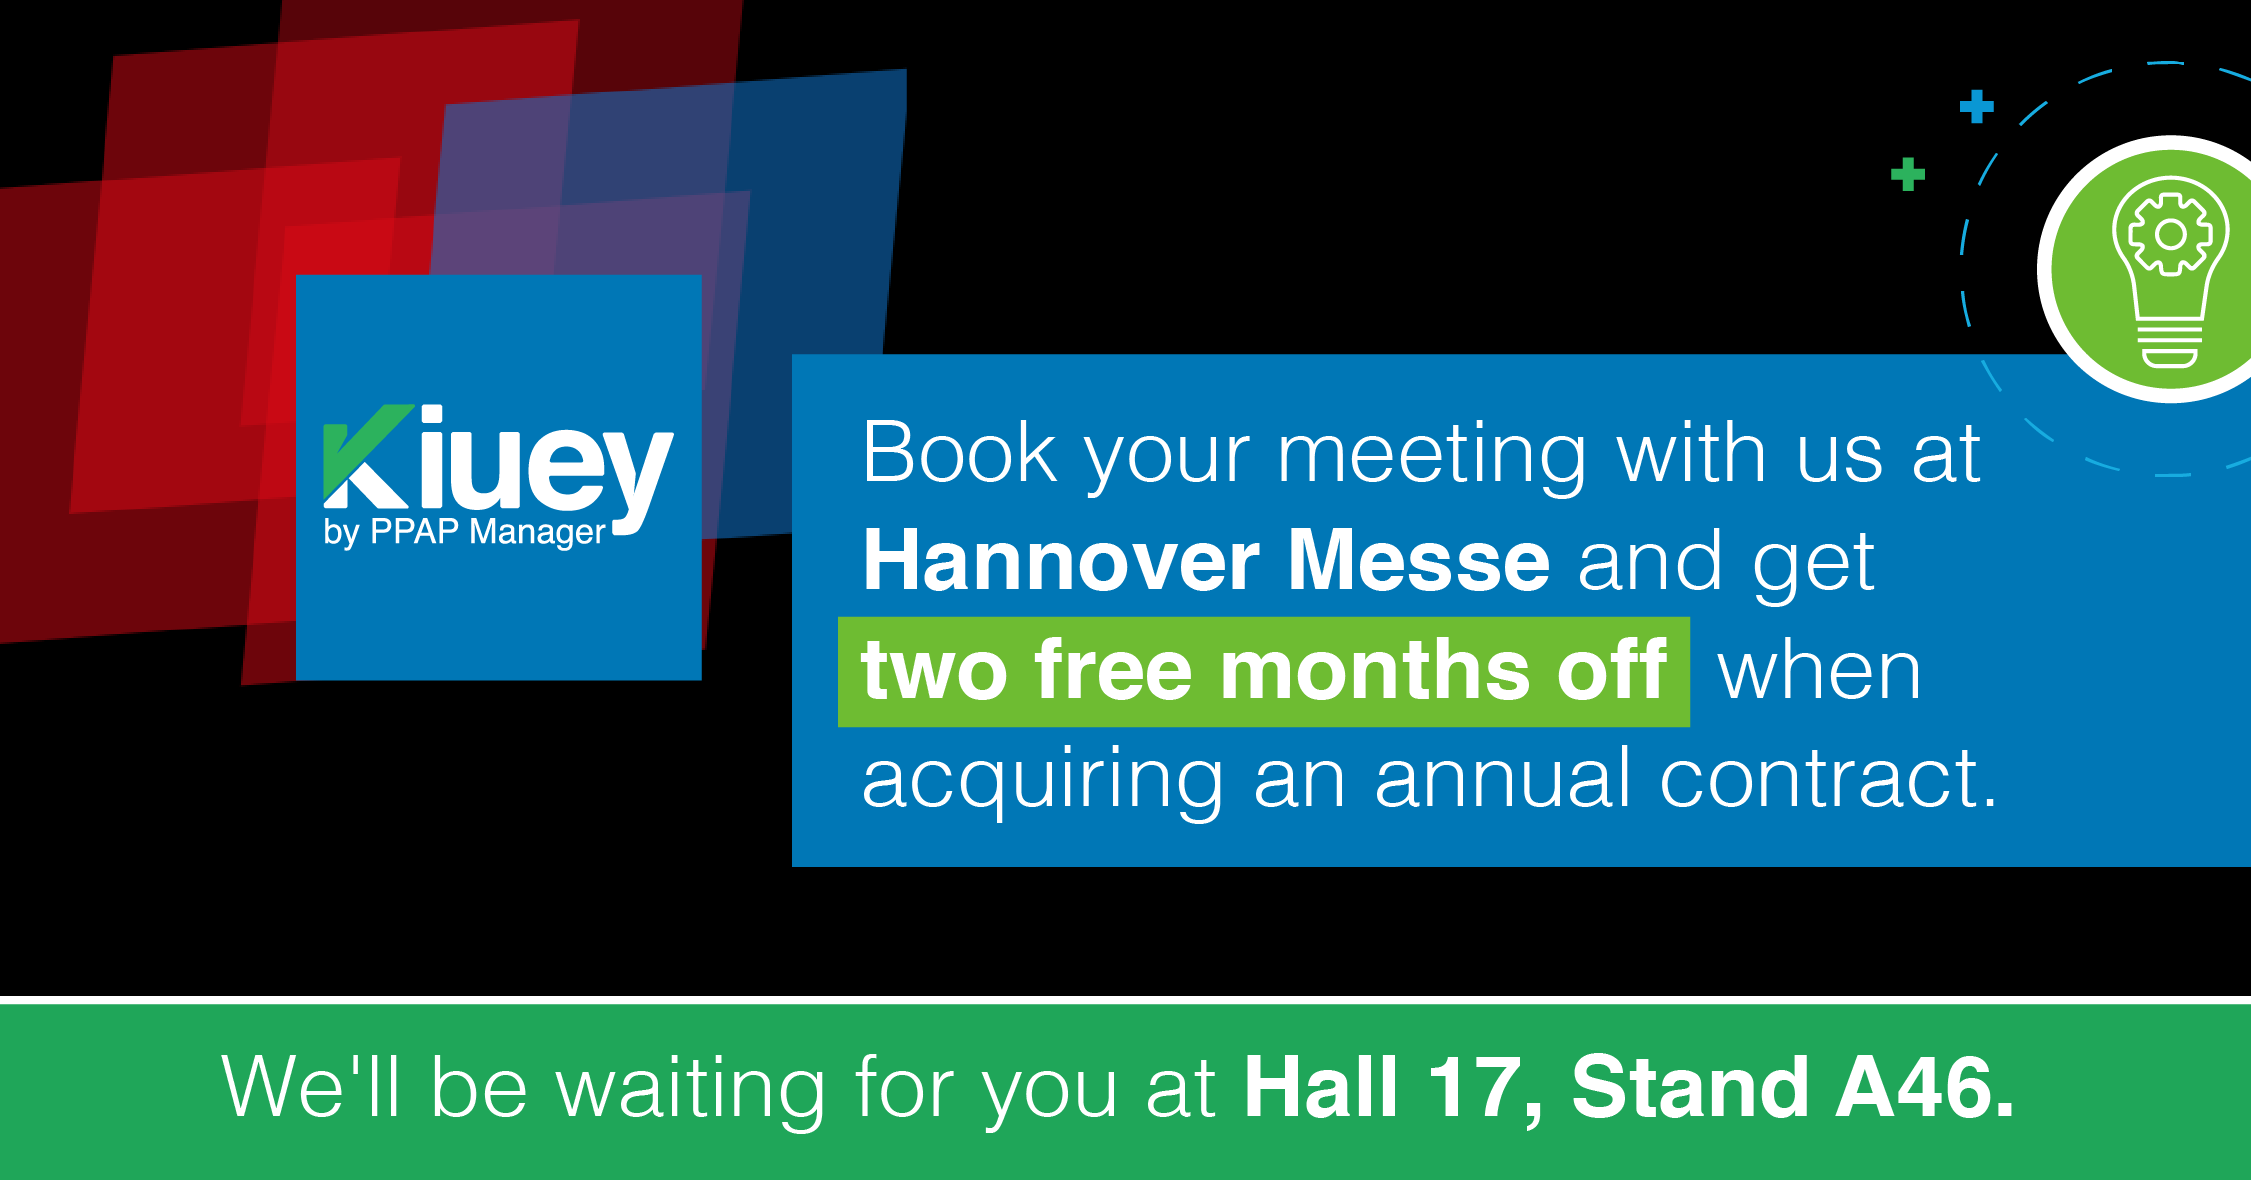 Meet with Kiuey at Hannover Messe 2023